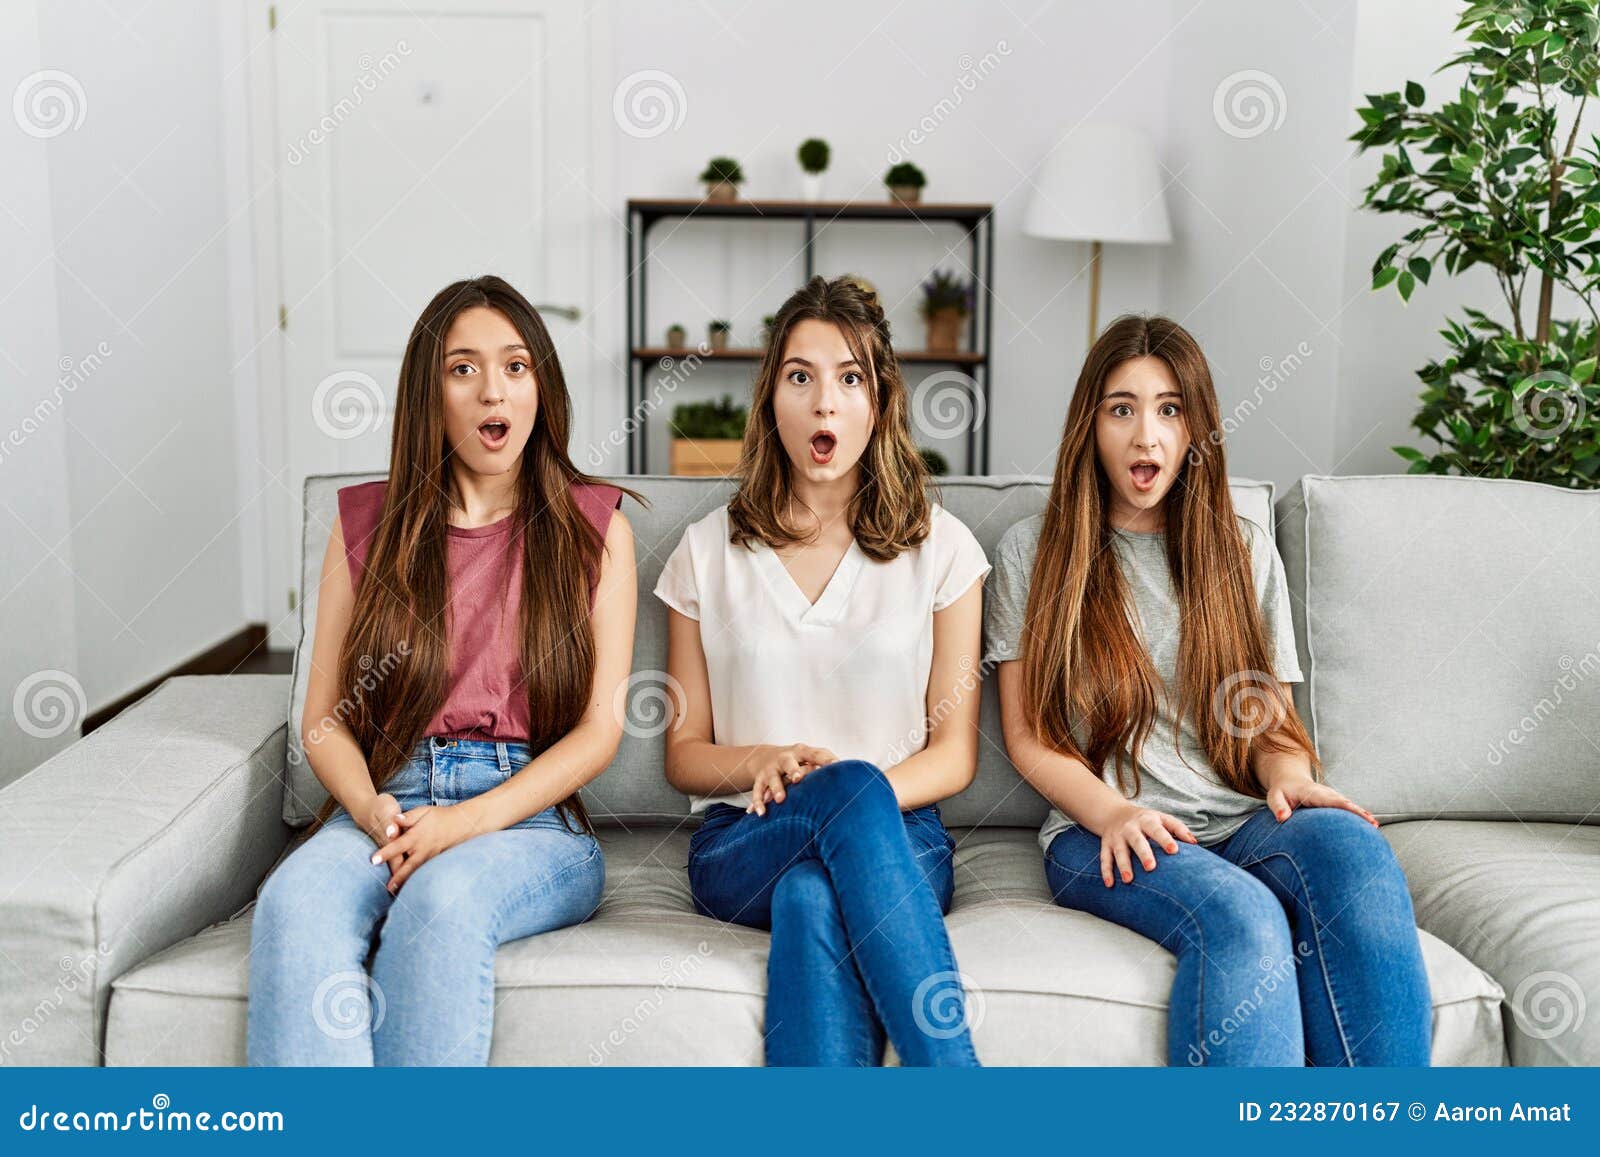 Group Of Three Hispanic Girls Sitting On The Sofa At Home Afraid And Shocked With Surprise